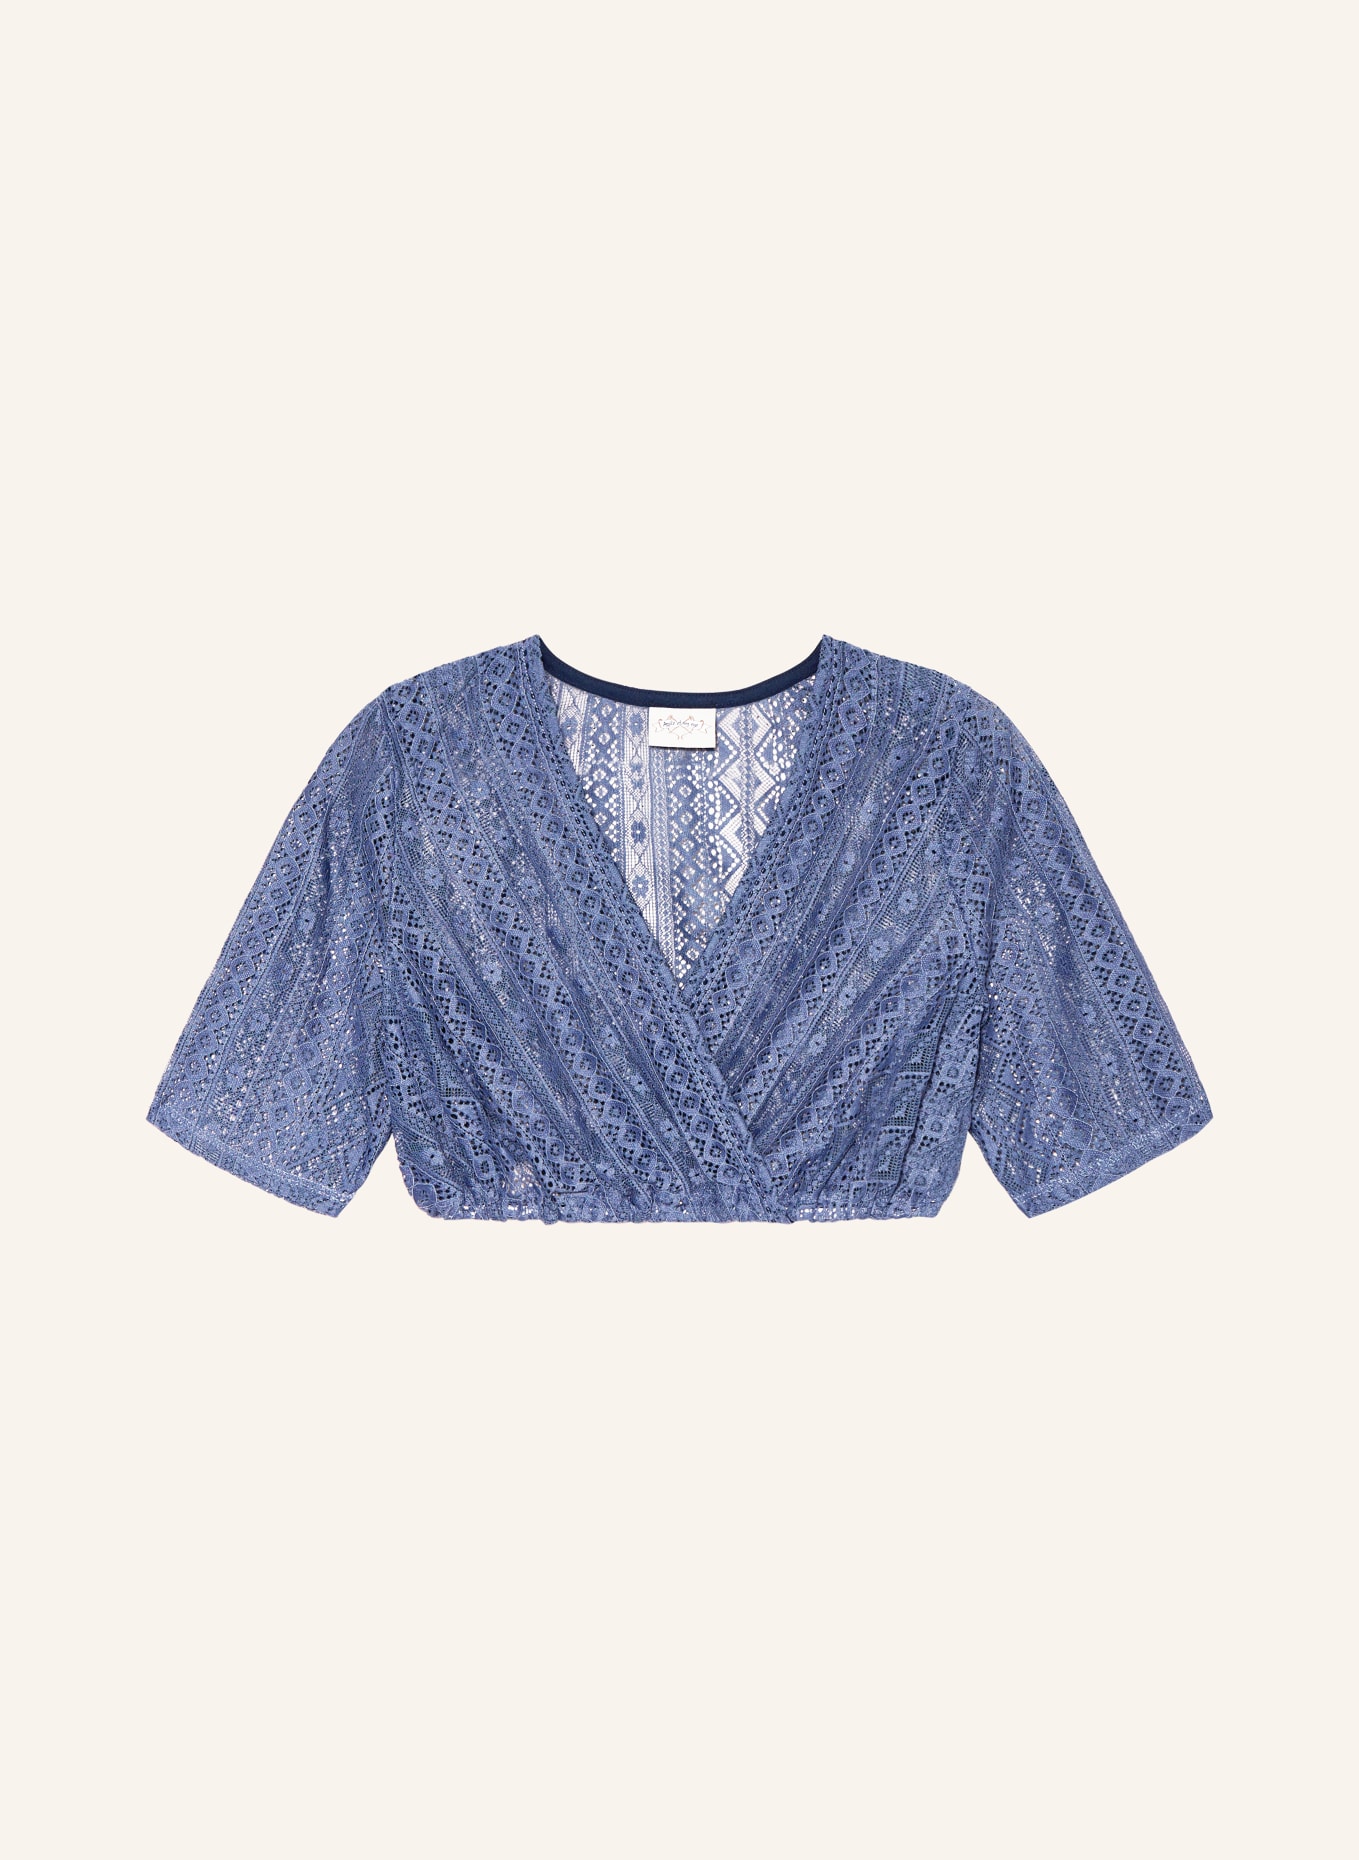 BERWIN & WOLFF Dirndl blouse made of lace, Color: BLUE (Image 1)